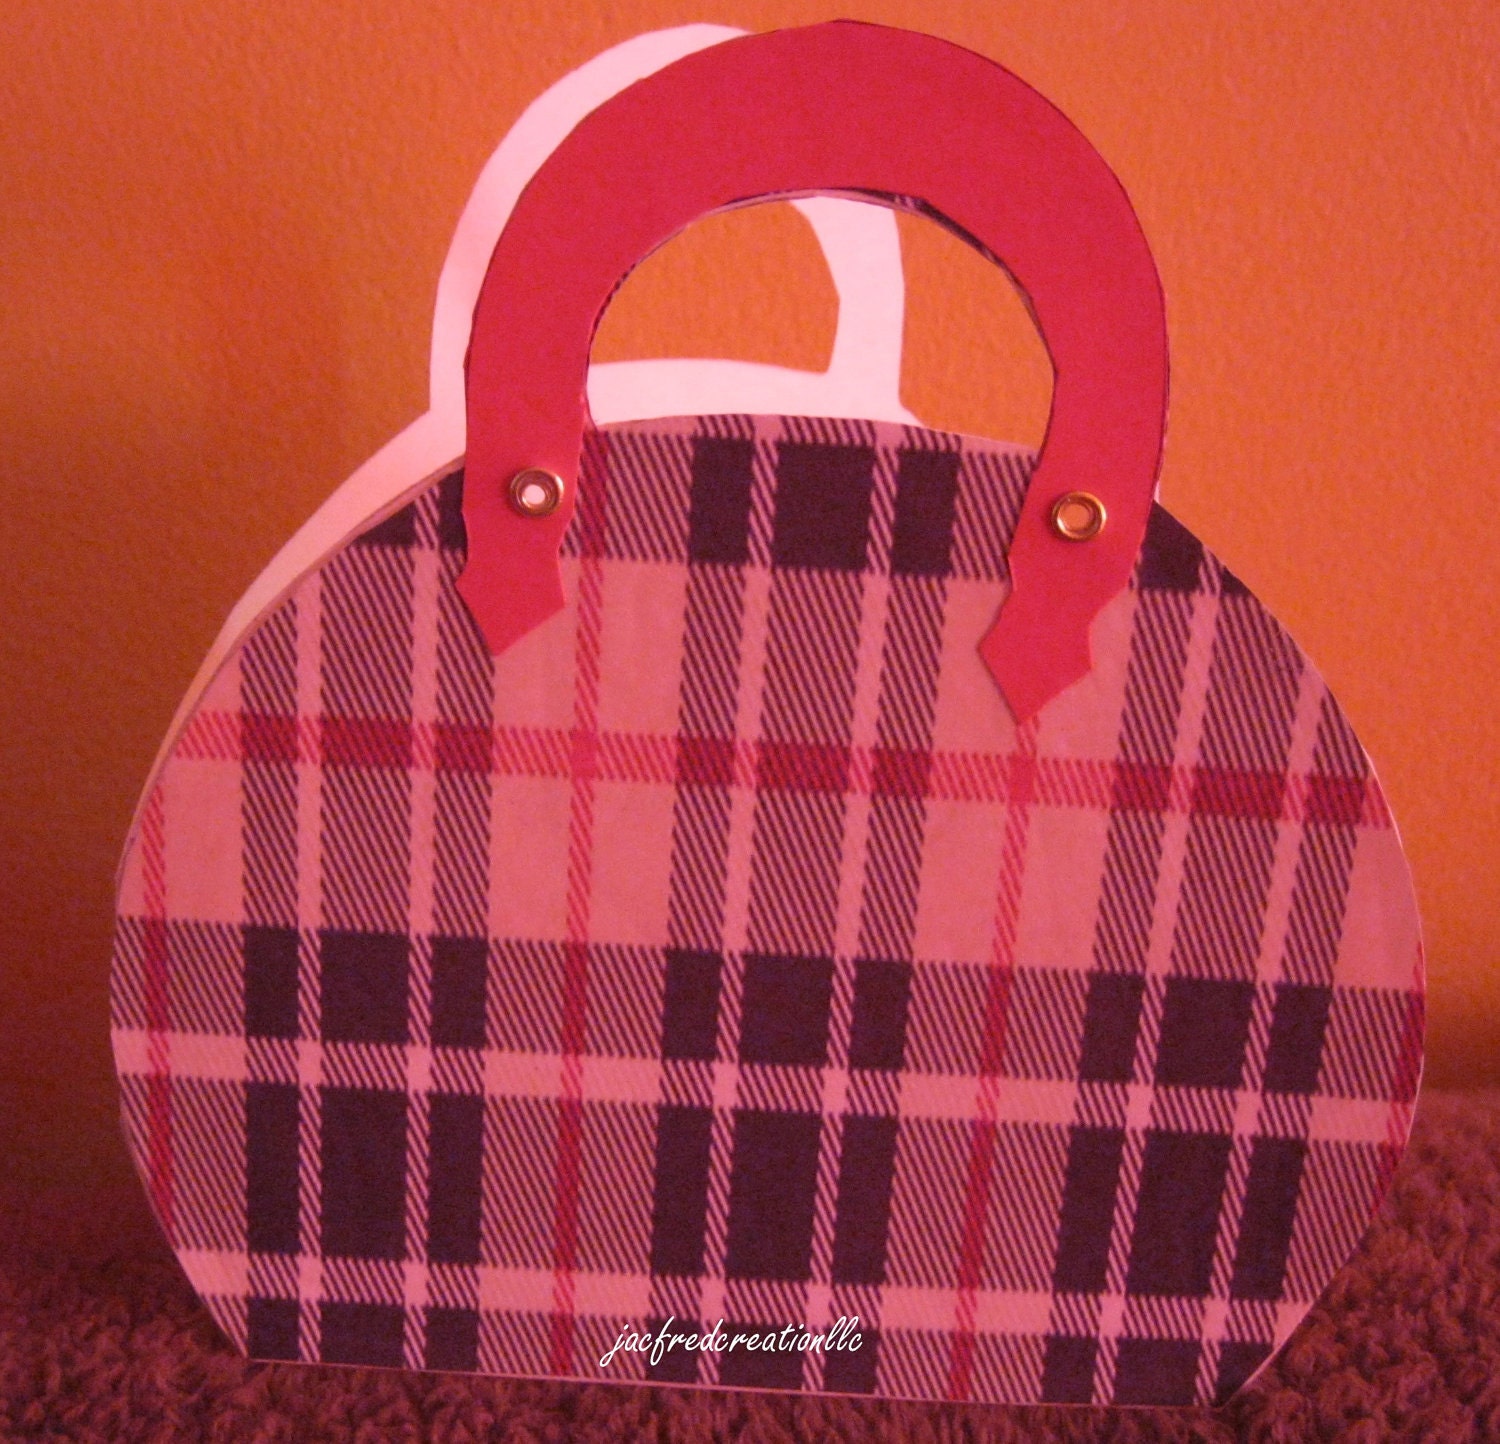 Faux Designer Bags Greeting cards. "A Jacfred Creation Exclusive"